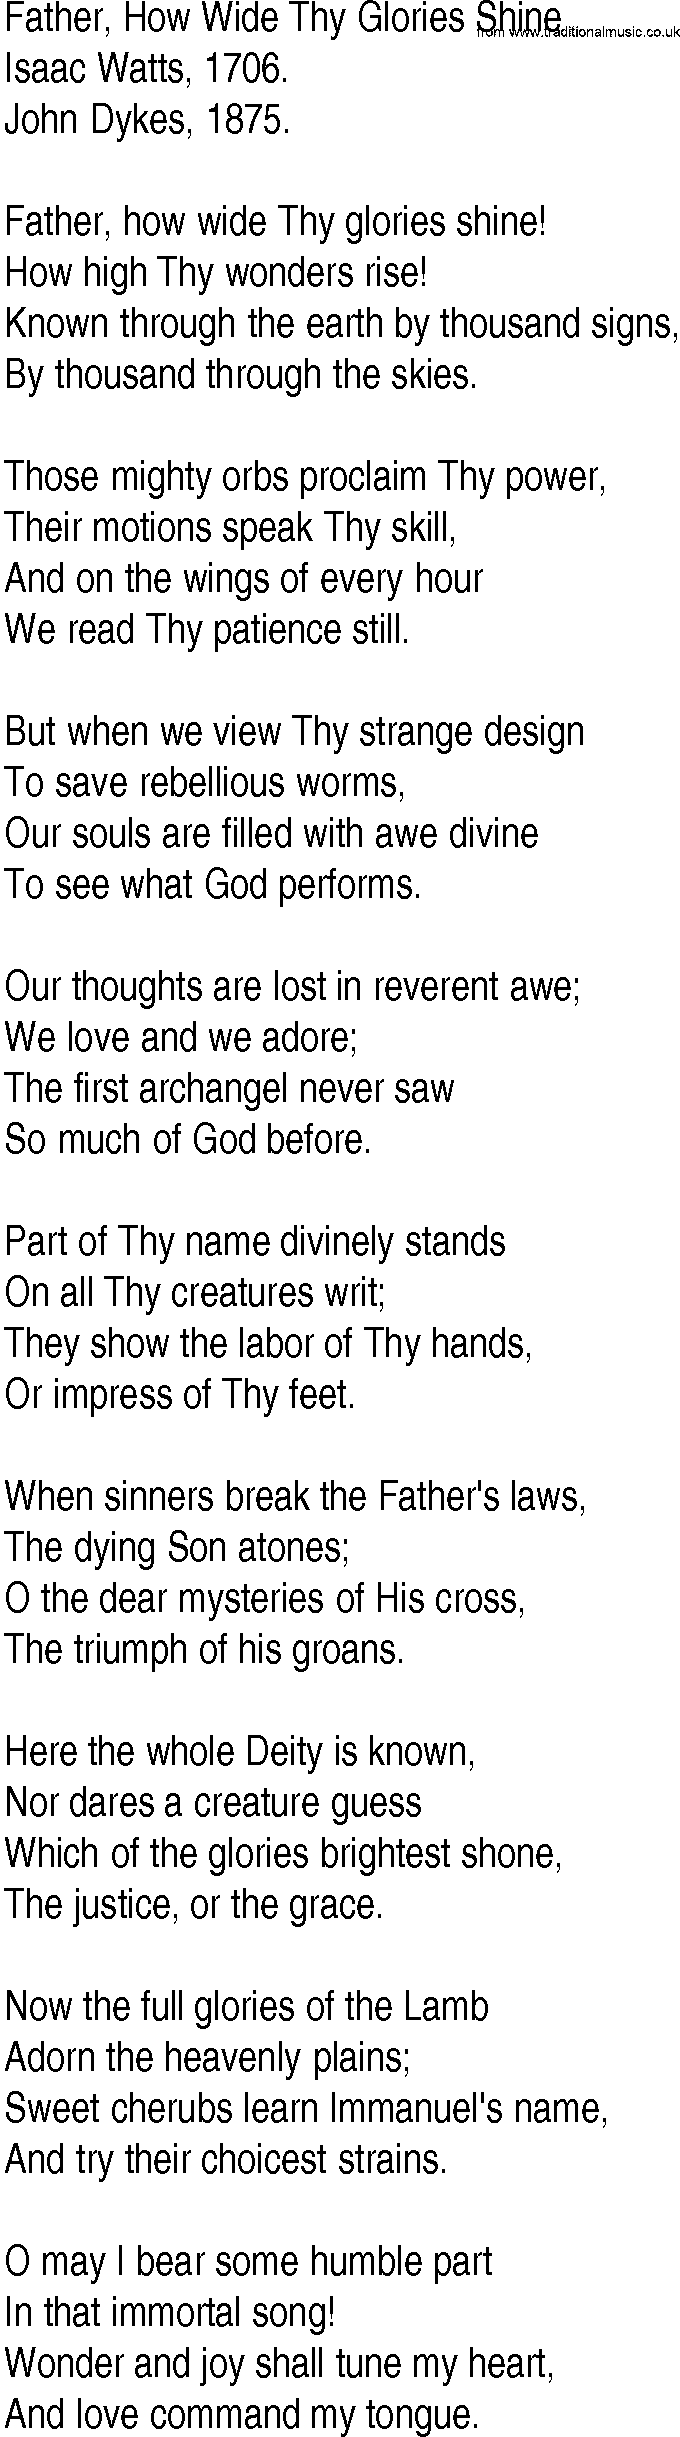 Hymn and Gospel Song: Father, How Wide Thy Glories Shine by Isaac Watts lyrics